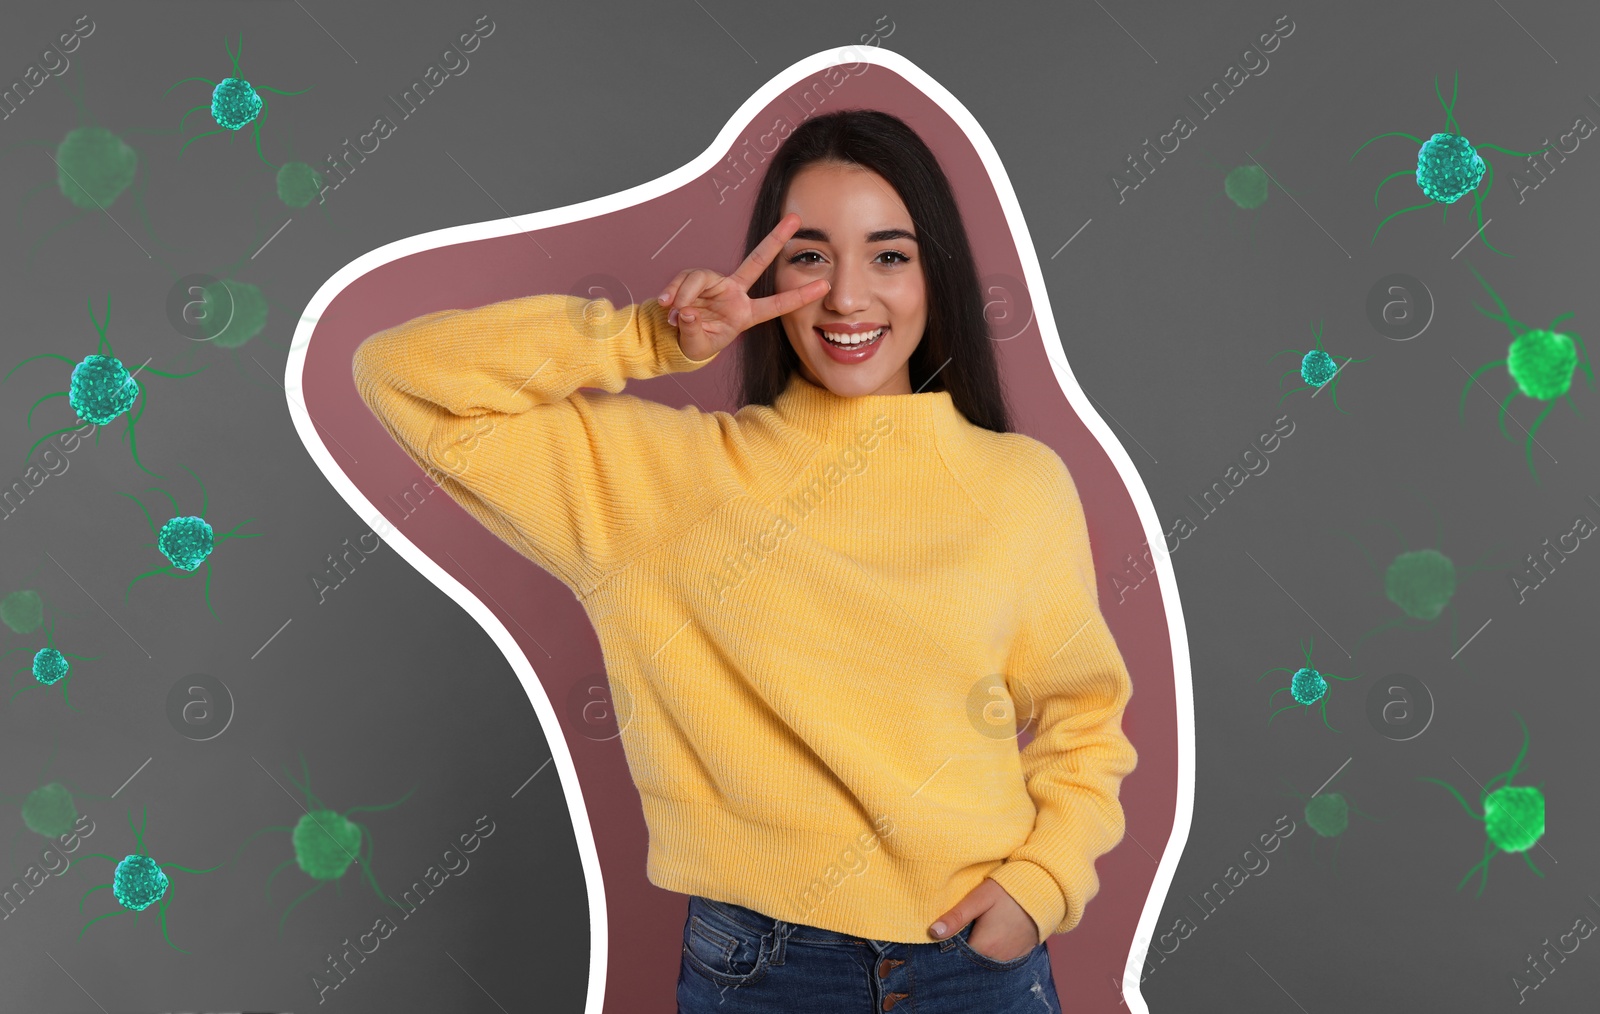 Image of Woman with strong immunity surrounded by viruses on color background